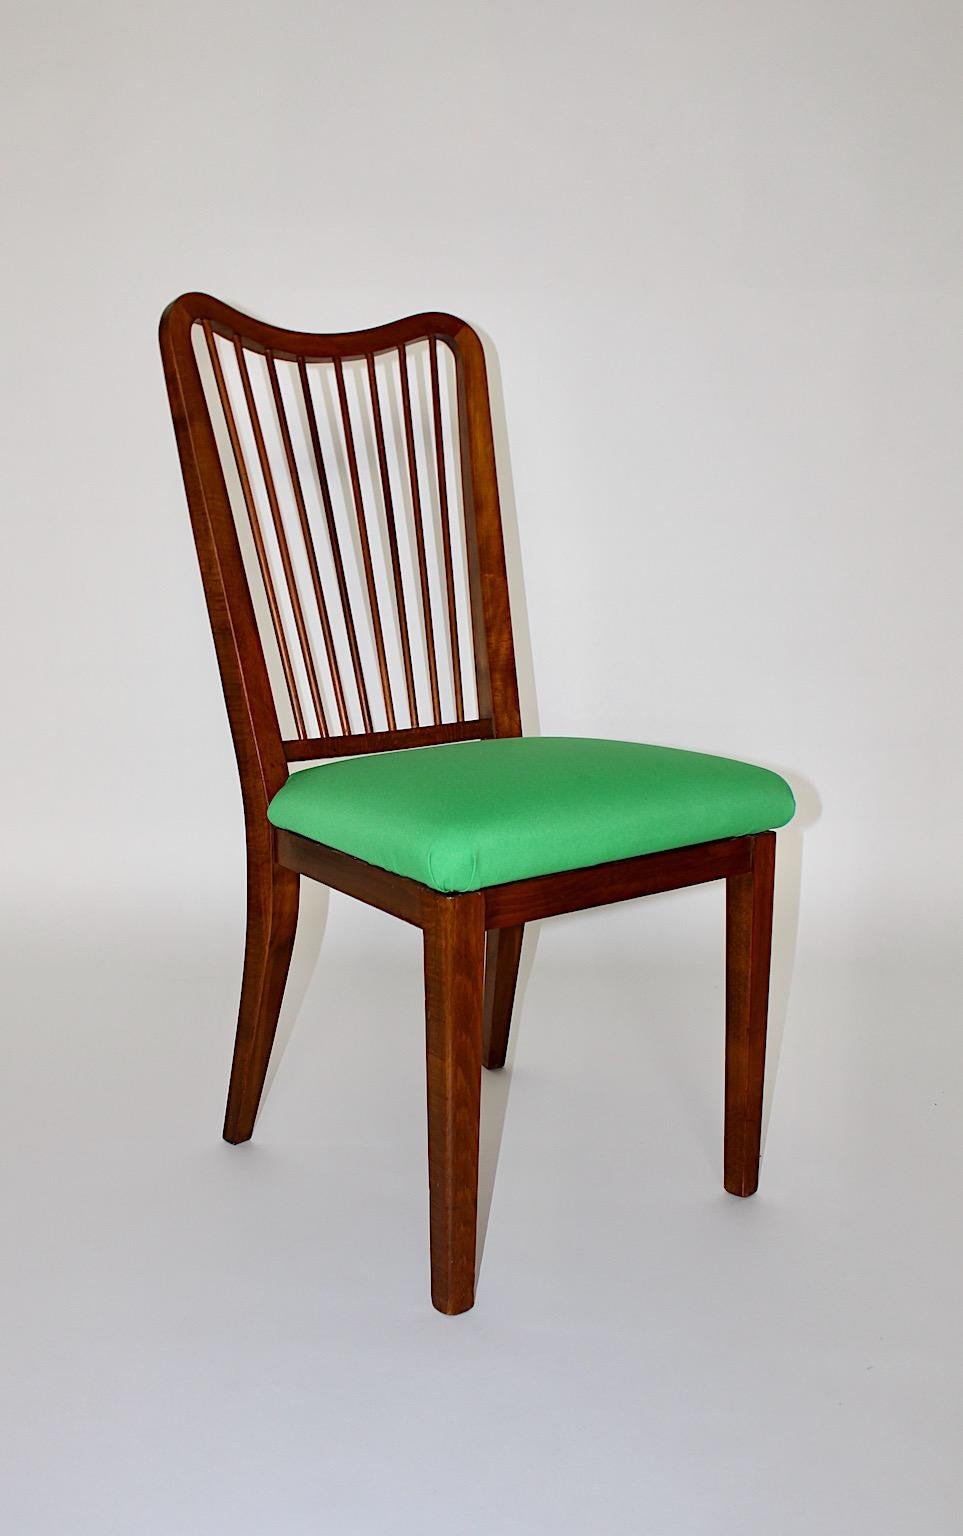 Mid-Century Modern side chair or office chair from beech with upholstery in green textile fabric 1950s Vienna.
A beautiful side chair or chair design attributed to Oswald Haerdtl from beech, walnut stained shellac polished by hand with a seat new